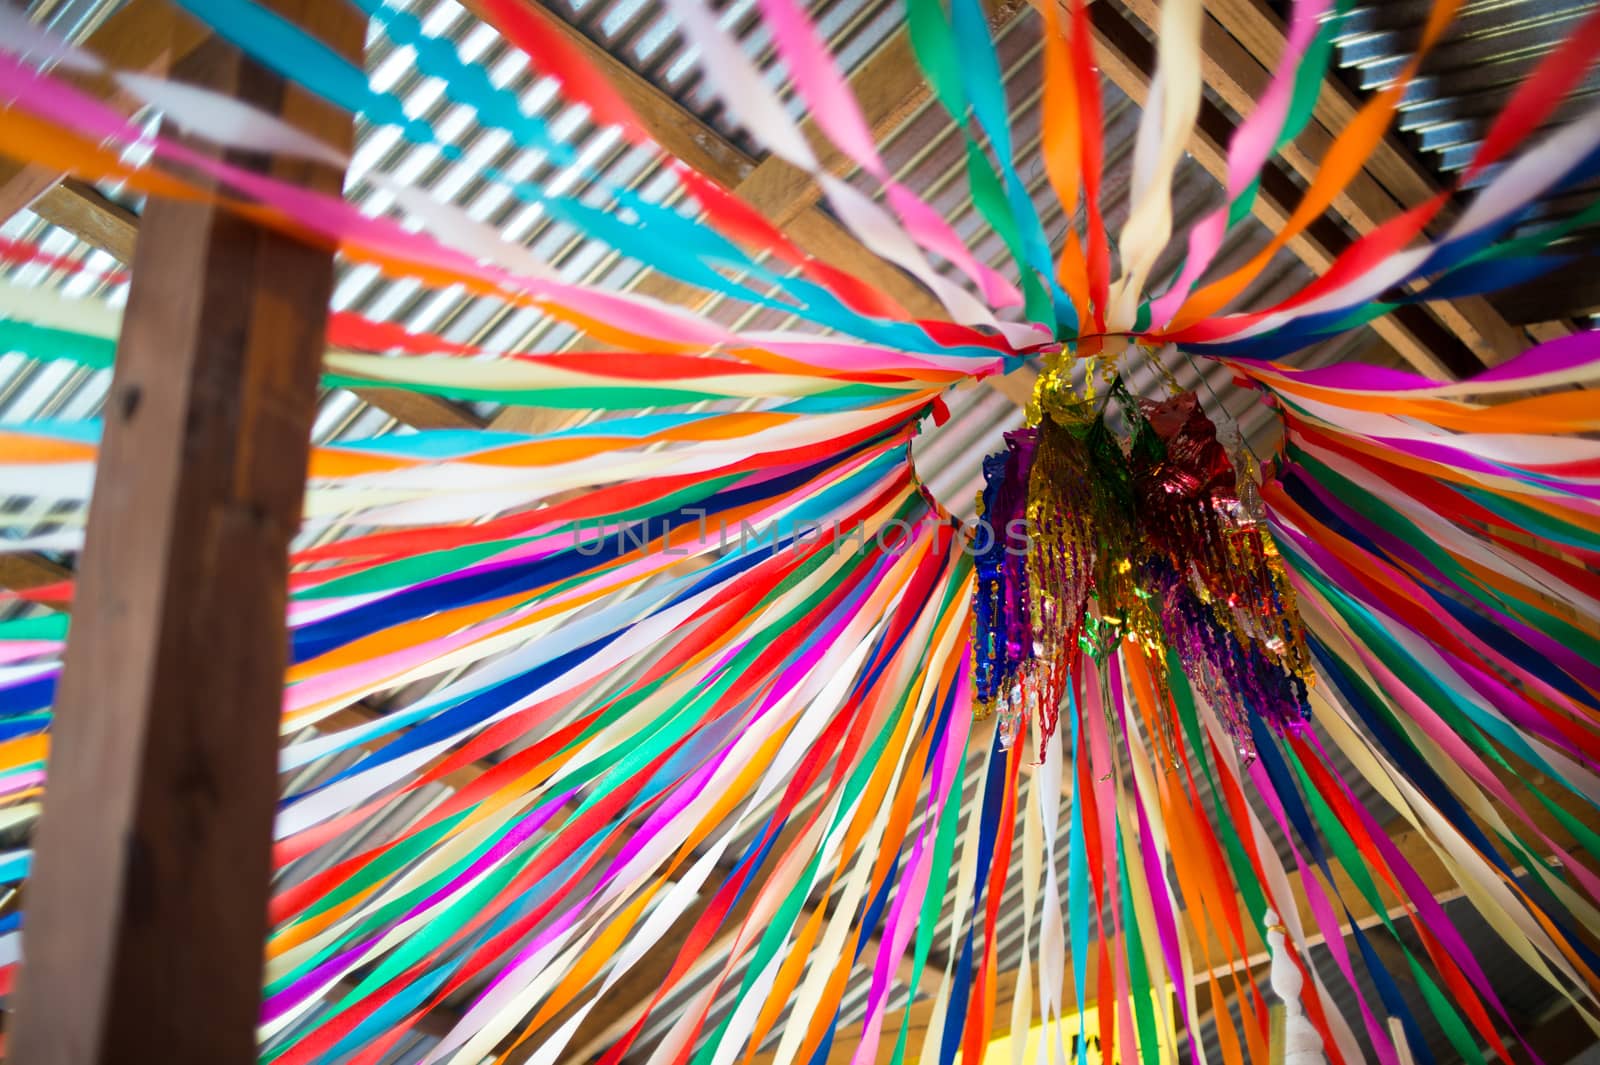 Close Up of line paper colorful, this is religion symbol object for monk ceremony